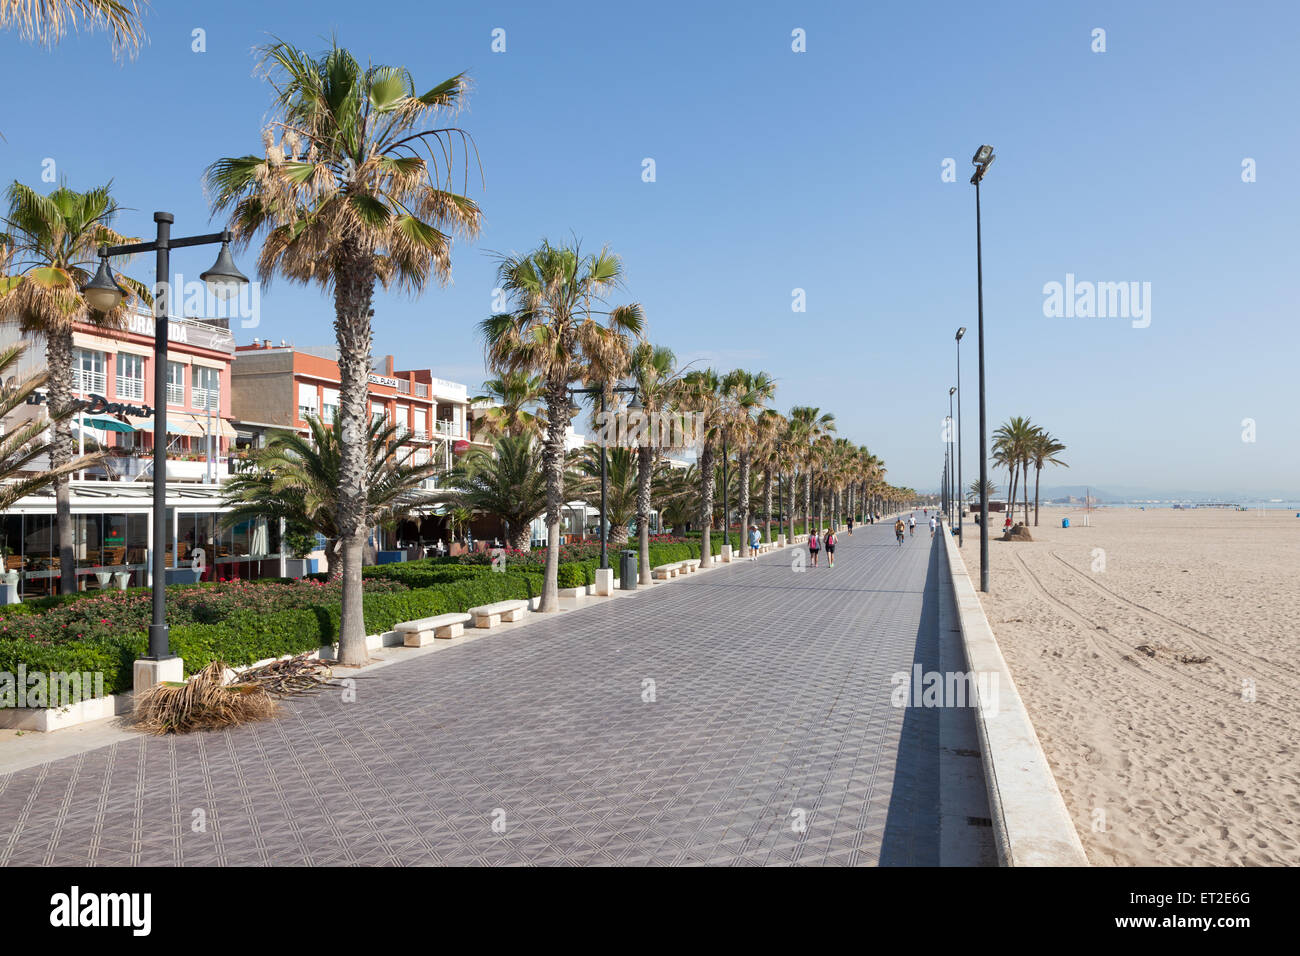 Beachfront promenade with date palm trees in Valencia, Spain Stock Photo